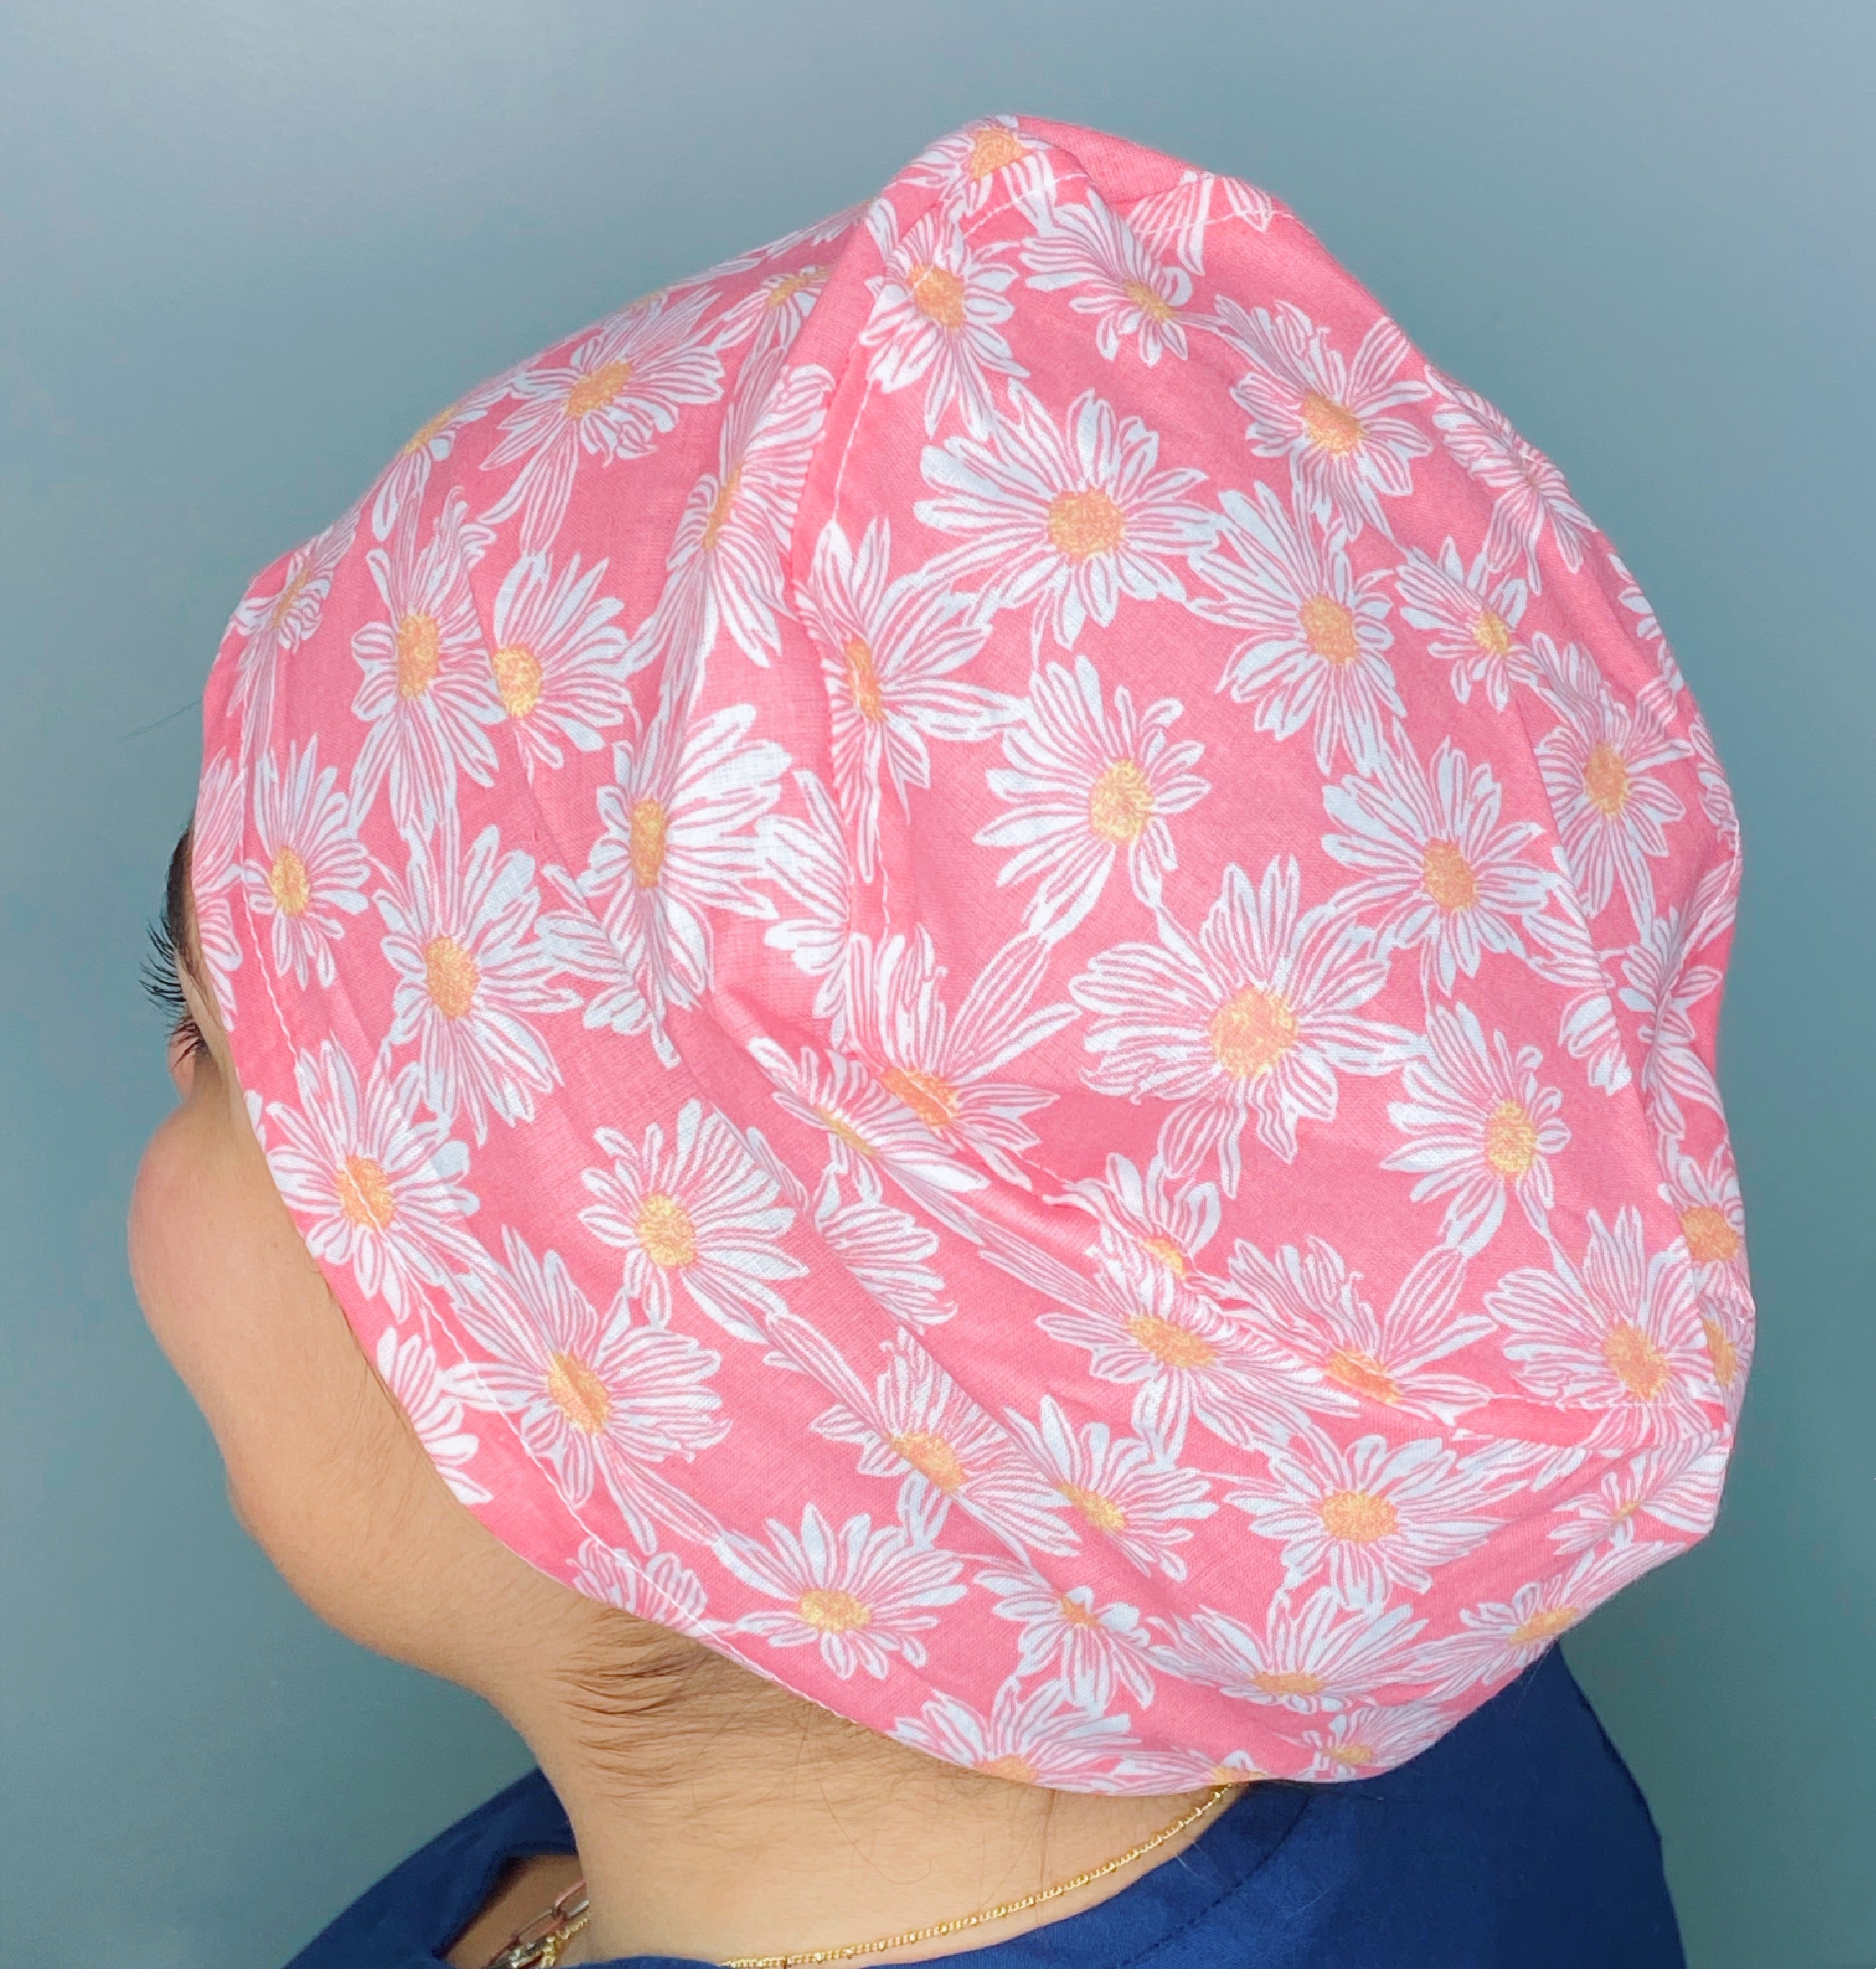 Drawn Flowers on Coral Pink Floral Euro